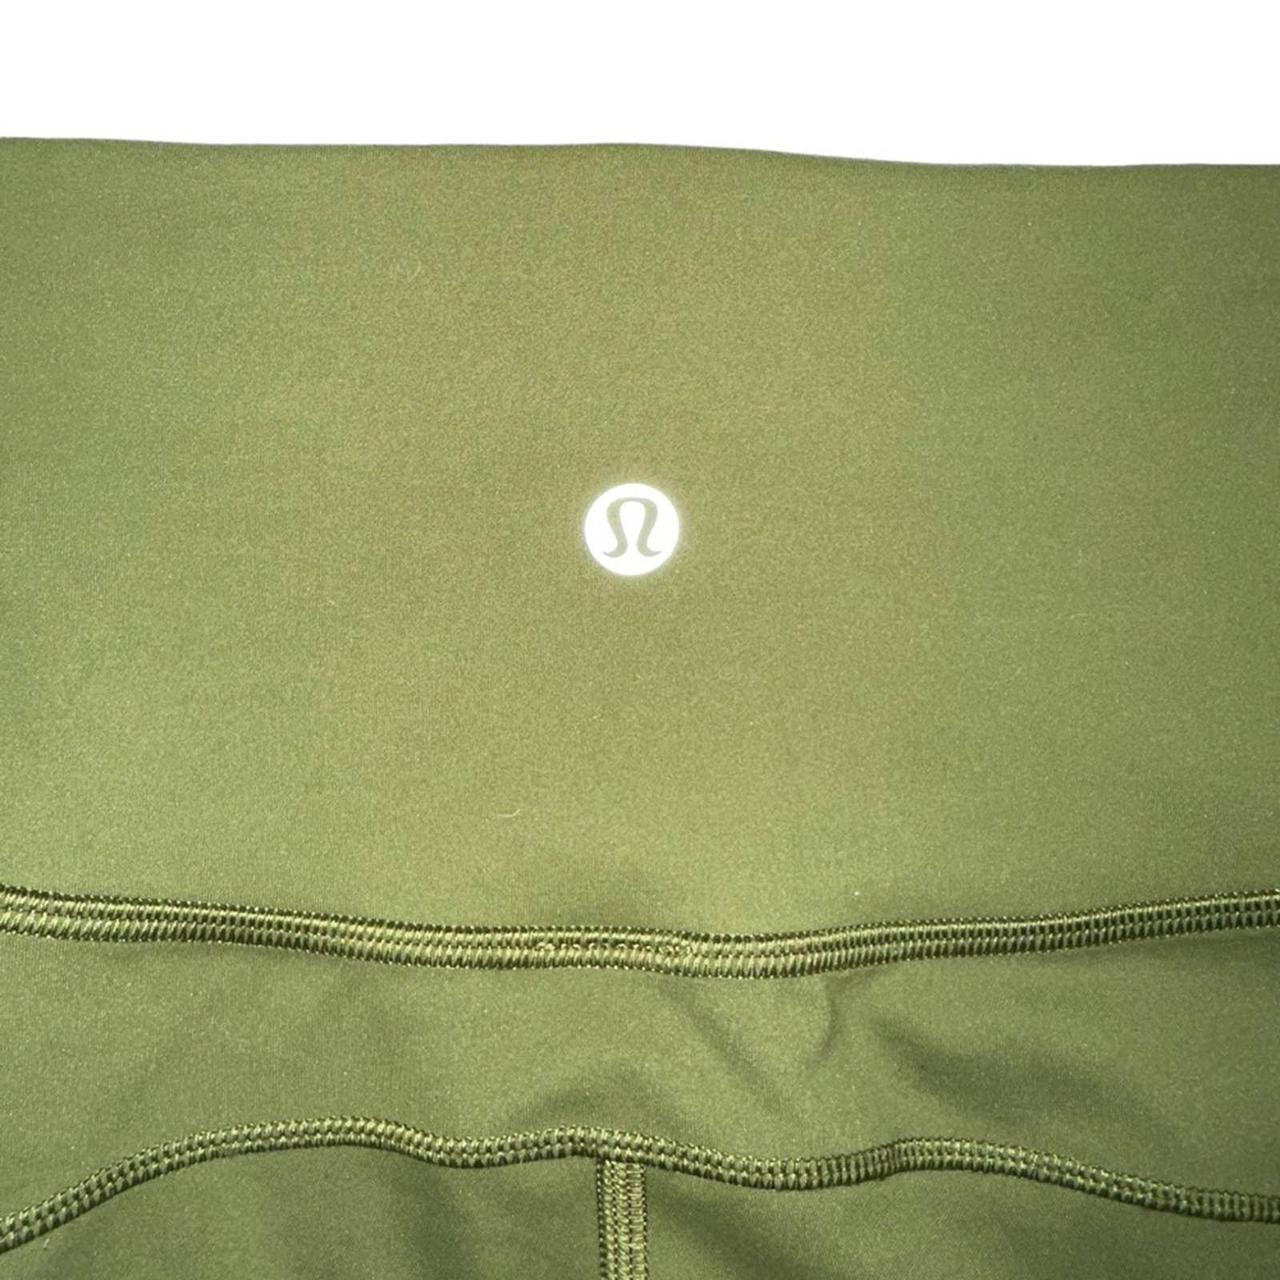 Lululemon In Movement Tight 25 with a hidden back - Depop